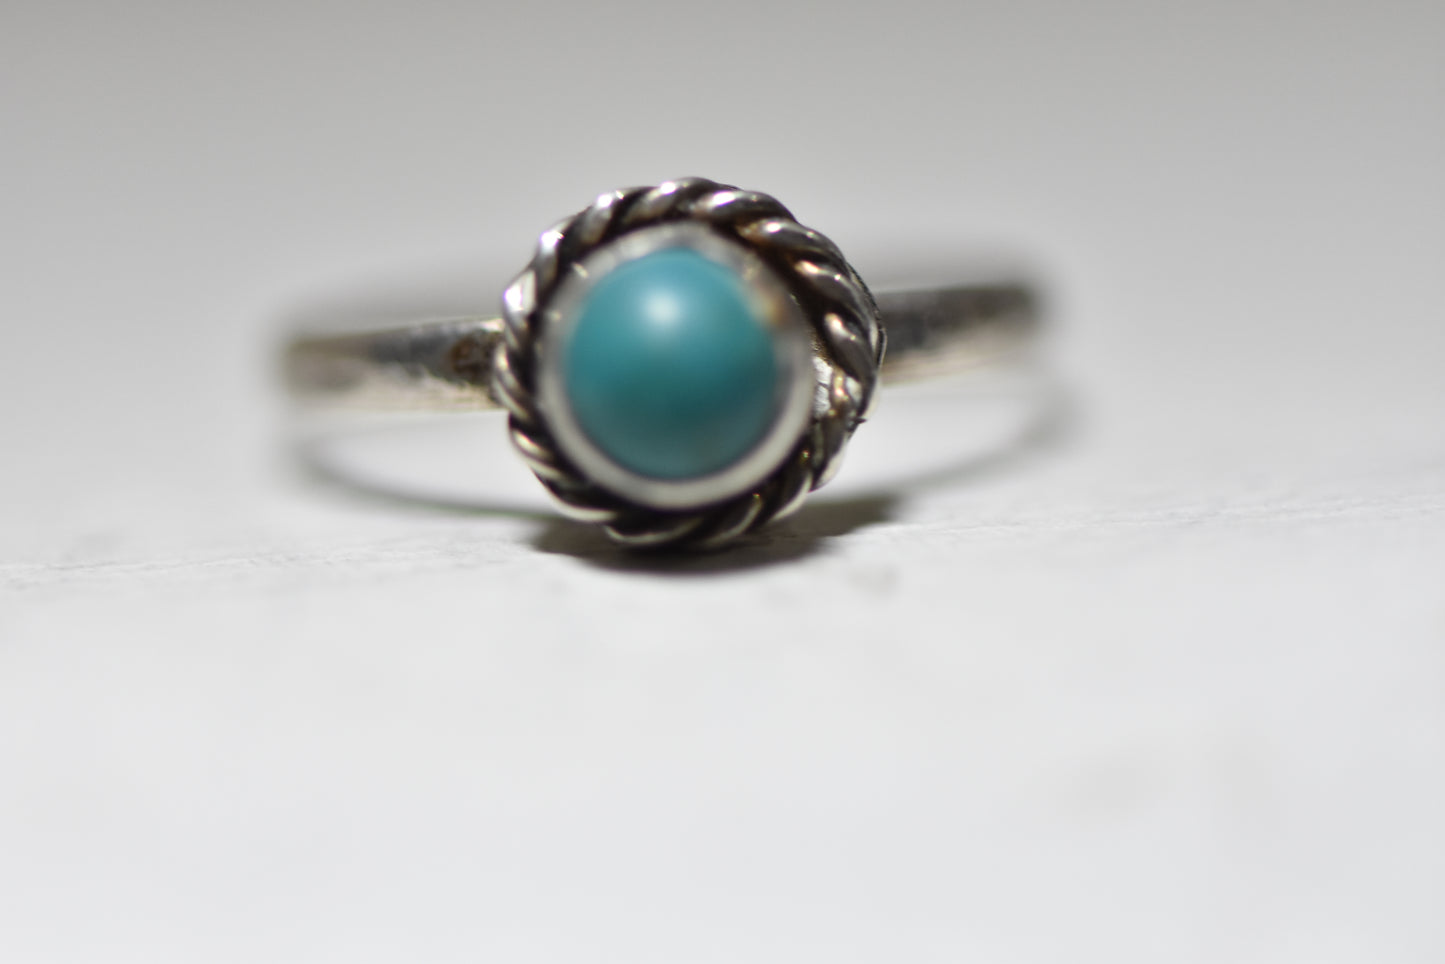 turquoise ring stacker pinky band sterling silver women girls children g